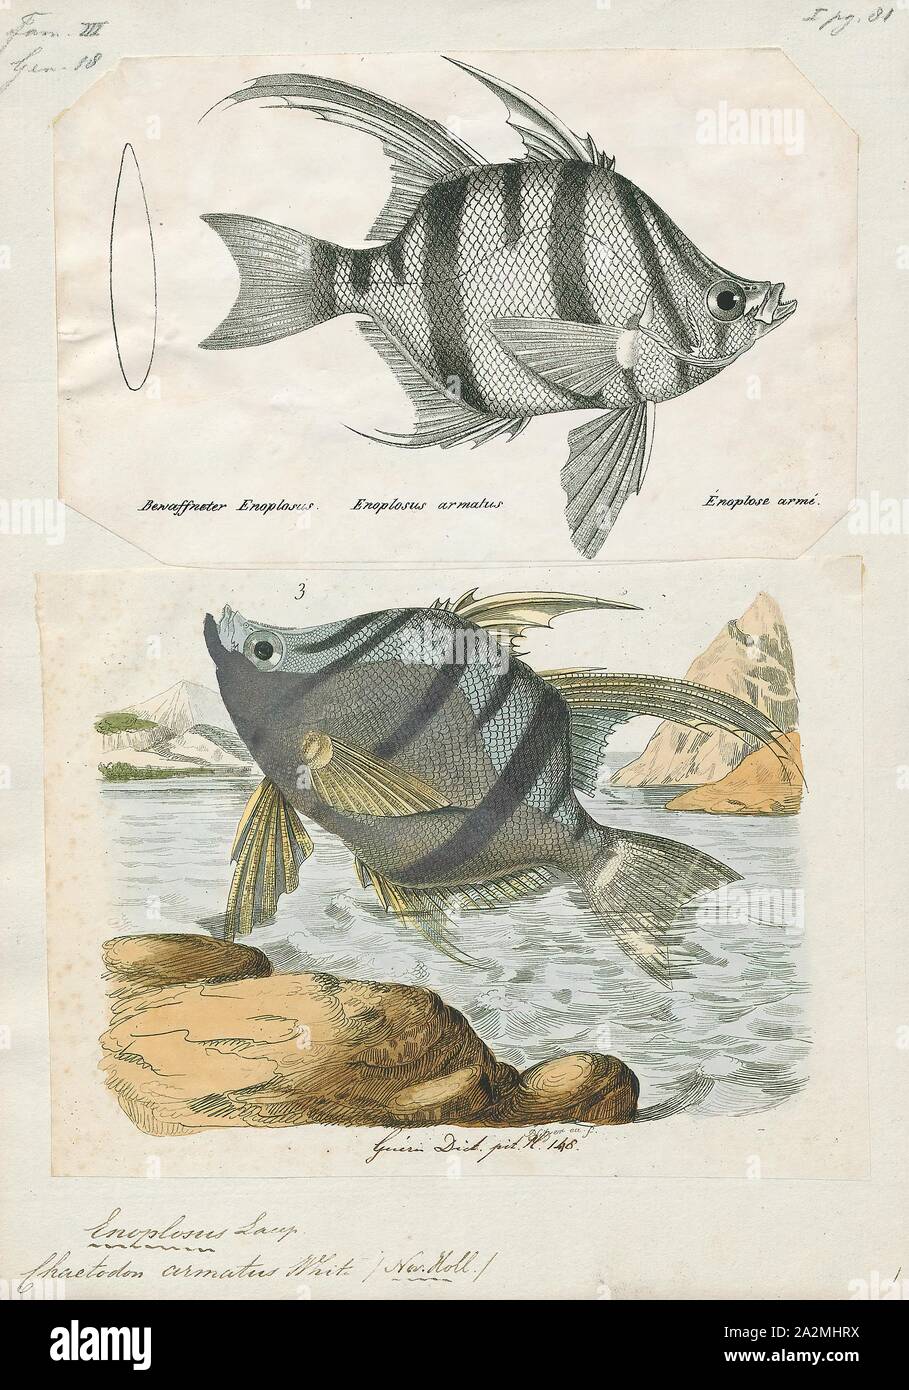 Enoplosus armatus, Print, Enoplosus armatus, the old wife (plural: old wives), is a species of perciform fish endemic to the temperate coastal waters of Australia. It is the only modern species in the family Enoplosidae Stock Photo